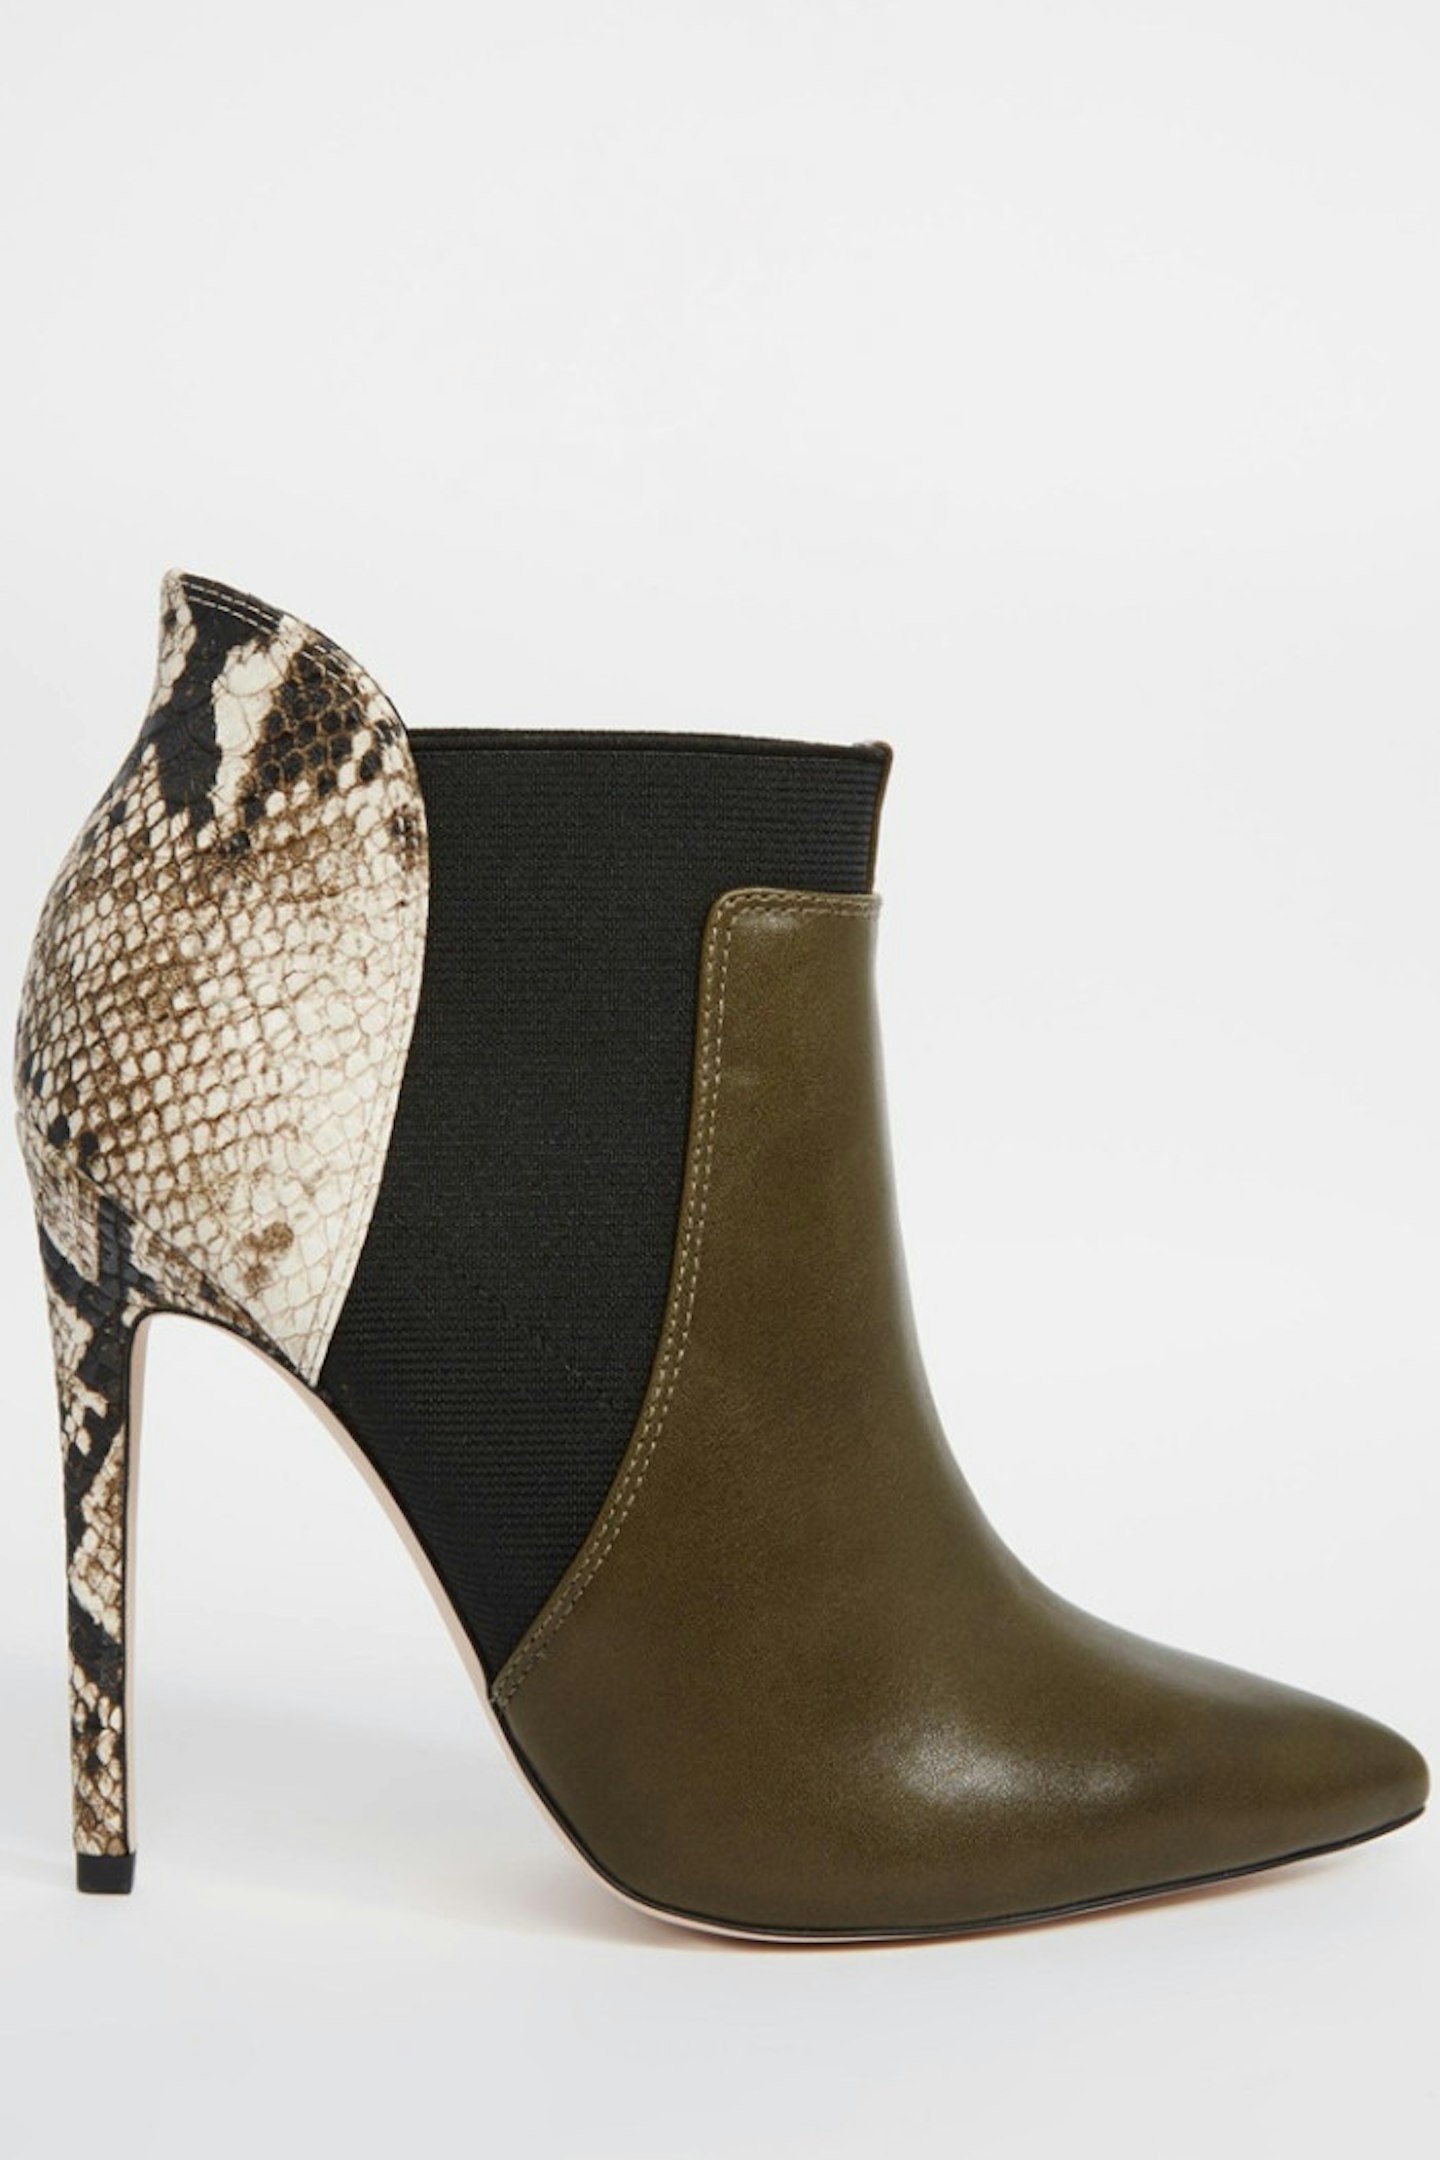 We love the python heel on this dreamy ankle boot from ASOS.